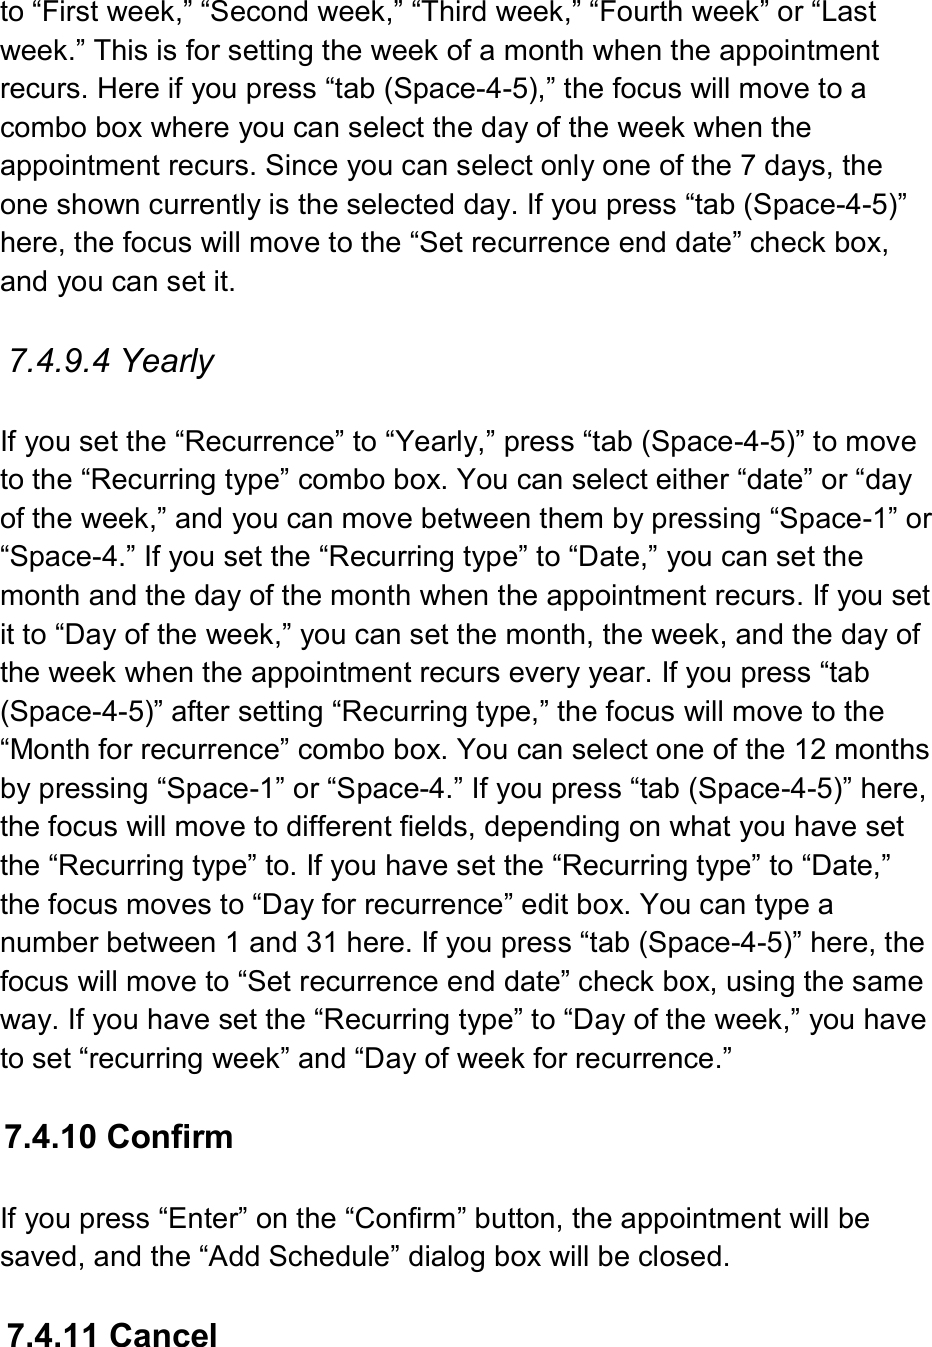  to “First week,” “Second week,” “Third week,” “Fourth week” or “Last week.” This is for setting the week of a month when the appointment recurs. Here if you press “tab (Space-4-5),” the focus will move to a combo box where you can select the day of the week when the appointment recurs. Since you can select only one of the 7 days, the one shown currently is the selected day. If you press “tab (Space-4-5)” here, the focus will move to the “Set recurrence end date” check box, and you can set it.  7.4.9.4 Yearly  If you set the “Recurrence” to “Yearly,” press “tab (Space-4-5)” to move to the “Recurring type” combo box. You can select either “date” or “day of the week,” and you can move between them by pressing “Space-1” or “Space-4.” If you set the “Recurring type” to “Date,” you can set the month and the day of the month when the appointment recurs. If you set it to “Day of the week,” you can set the month, the week, and the day of the week when the appointment recurs every year. If you press “tab (Space-4-5)” after setting “Recurring type,” the focus will move to the “Month for recurrence” combo box. You can select one of the 12 months by pressing “Space-1” or “Space-4.” If you press “tab (Space-4-5)” here, the focus will move to different fields, depending on what you have set the “Recurring type” to. If you have set the “Recurring type” to “Date,” the focus moves to “Day for recurrence” edit box. You can type a number between 1 and 31 here. If you press “tab (Space-4-5)” here, the focus will move to “Set recurrence end date” check box, using the same way. If you have set the “Recurring type” to “Day of the week,” you have to set “recurring week” and “Day of week for recurrence.”    7.4.10 Confirm  If you press “Enter” on the “Confirm” button, the appointment will be saved, and the “Add Schedule” dialog box will be closed.  7.4.11 Cancel  